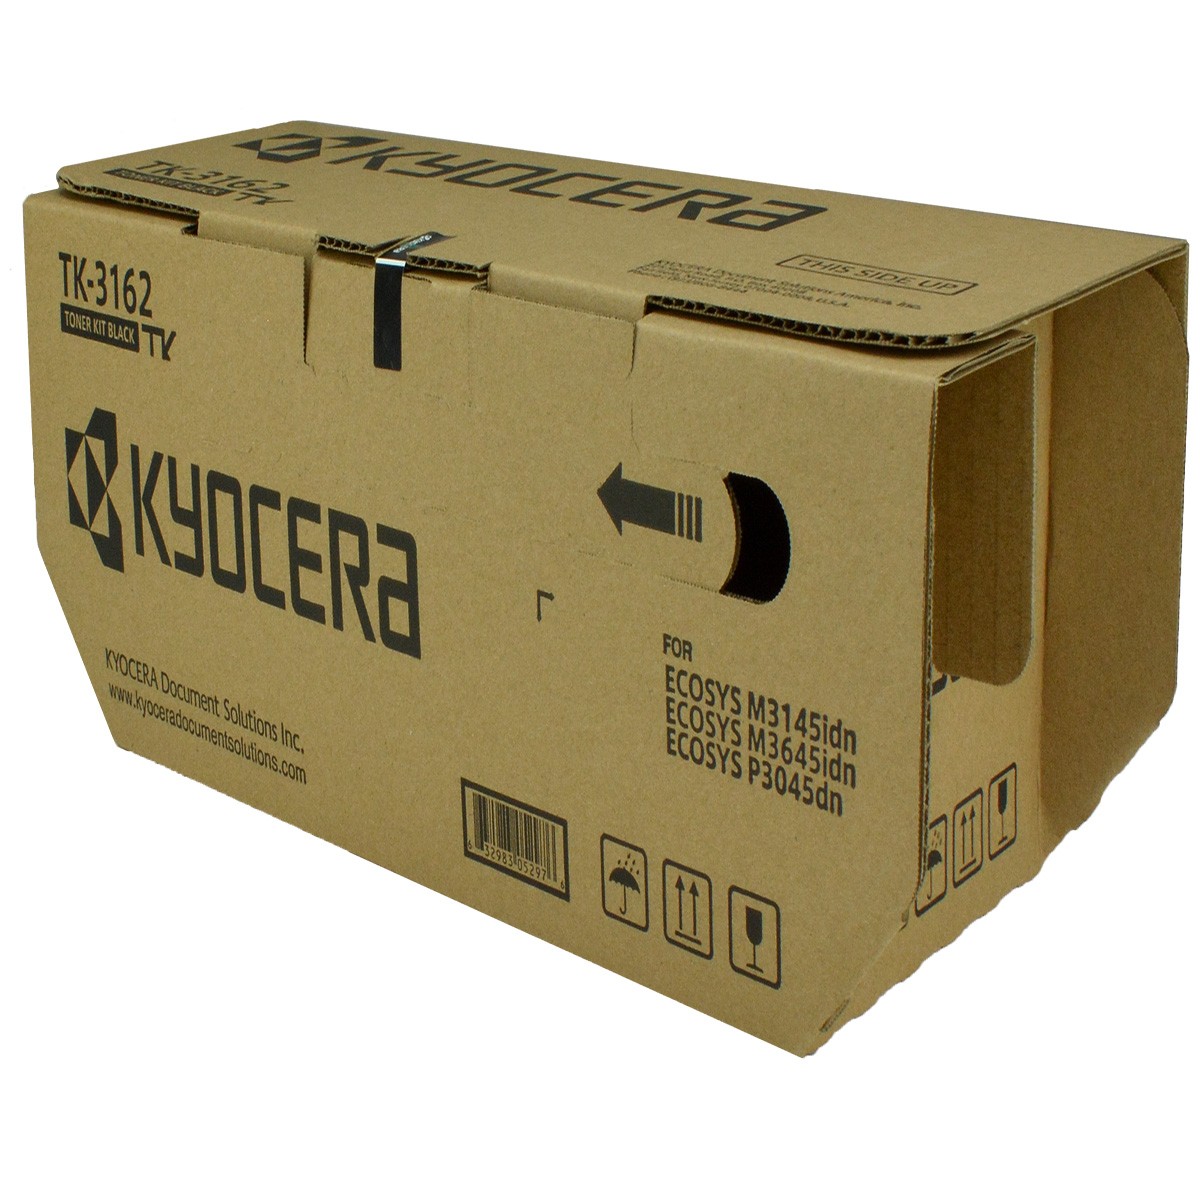 Kyocera 1T02T90US0 Model TK-3162 Black Toner Cartridge for ECOSYS P3045dn; Genuine Kyocera; Up to 12,500 Pages 